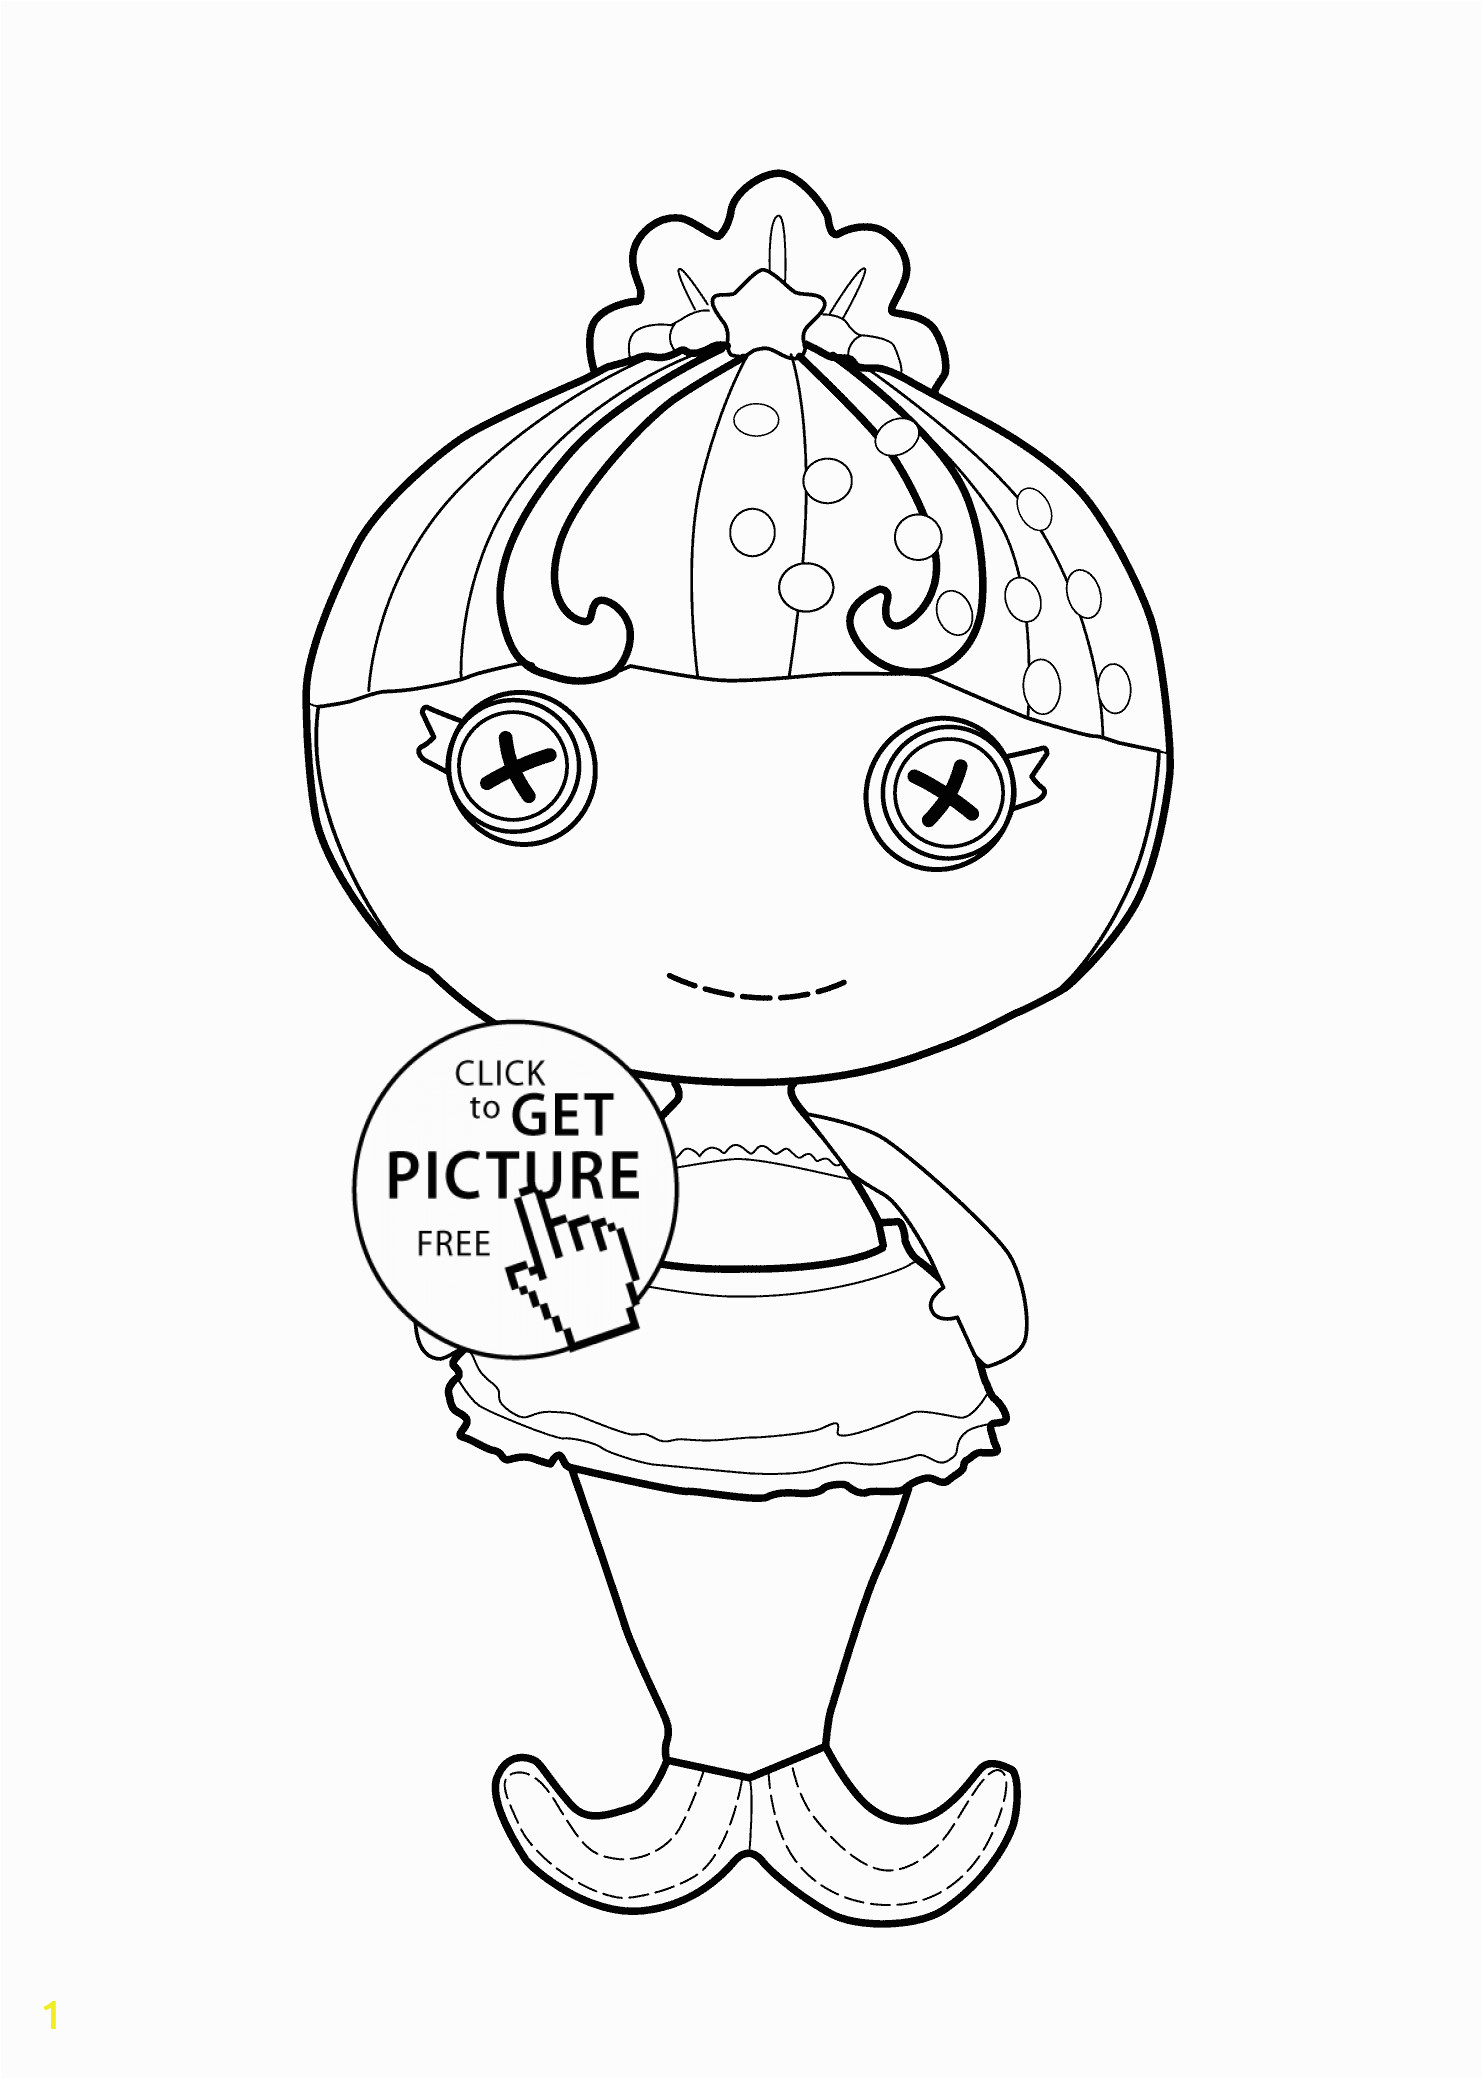 lalaloopsy doll coloring page for kids printable free little mermaid